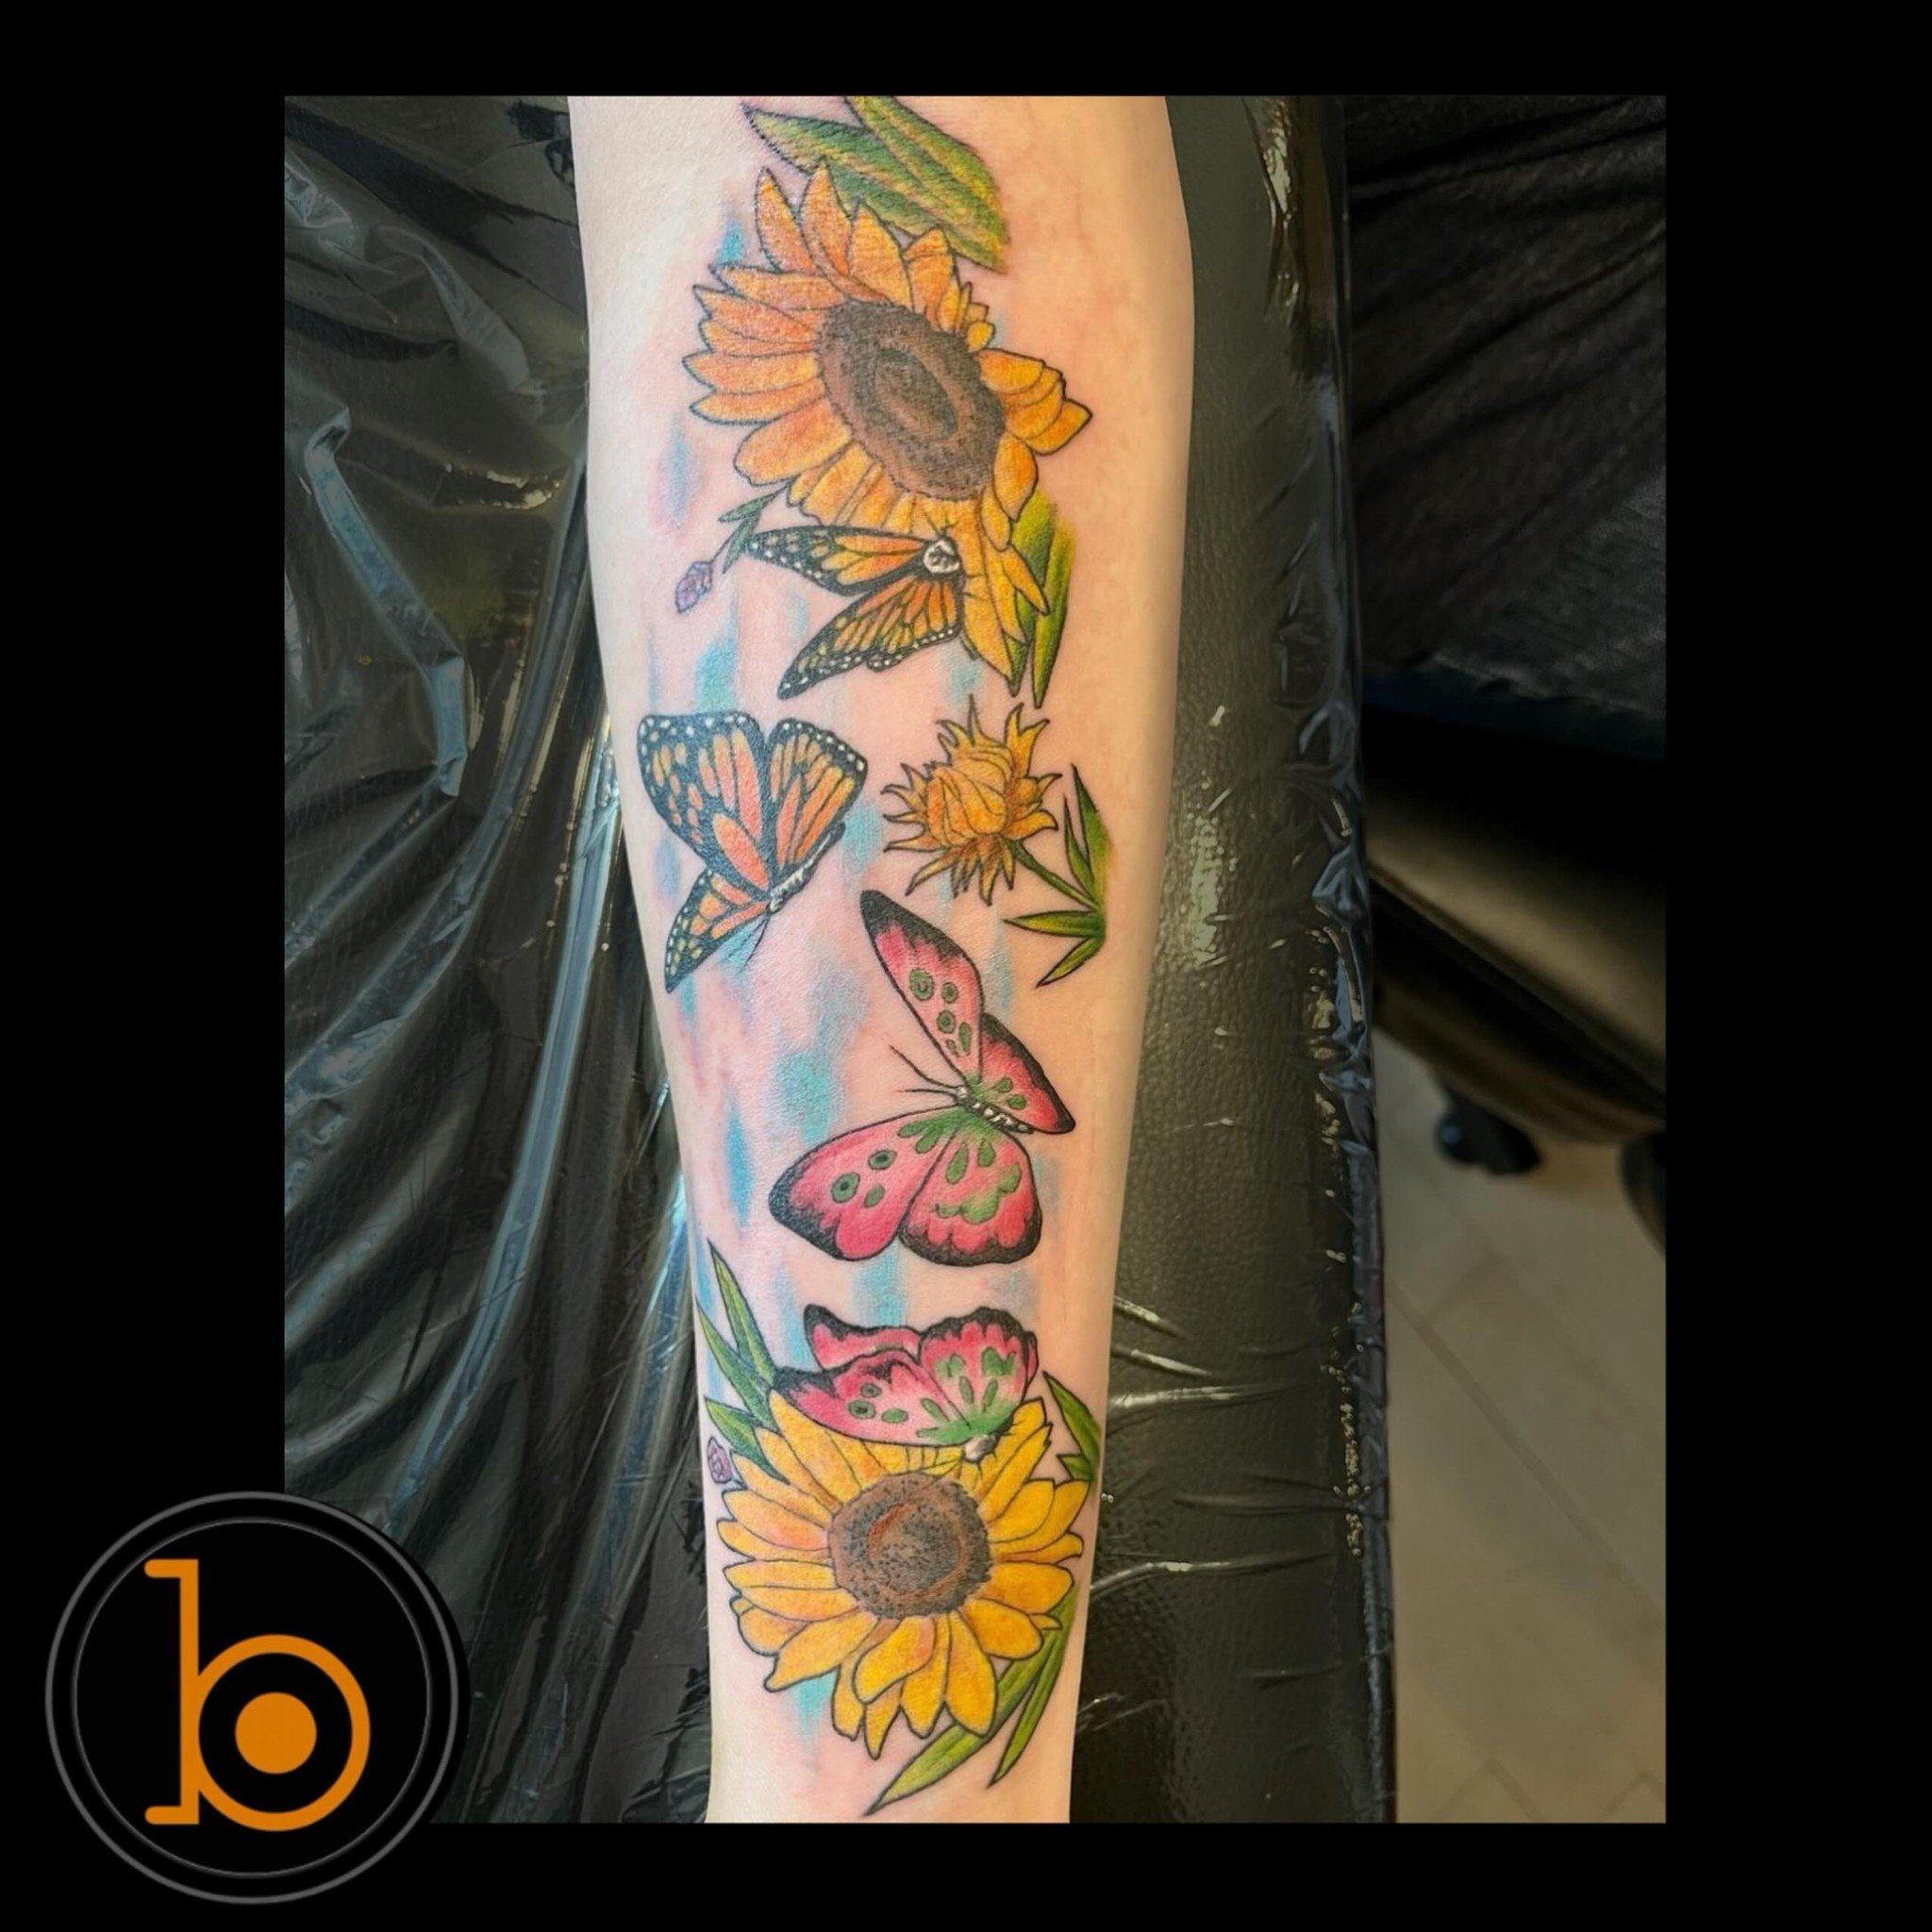 Manifesting warmer weather with all the butterfly tattoos lately&hellip; is it working? By resident artist @slotapop 🦋💐
➖➖➖➖➖➖➖➖➖➖➖➖➖➖➖➖➖
Blueprint Gallery
138 Russell St
 Hadley MA 01035
📱(413)-387-0221 
WALK-INS WELCOME 
🕸️ www.blueprintgallery